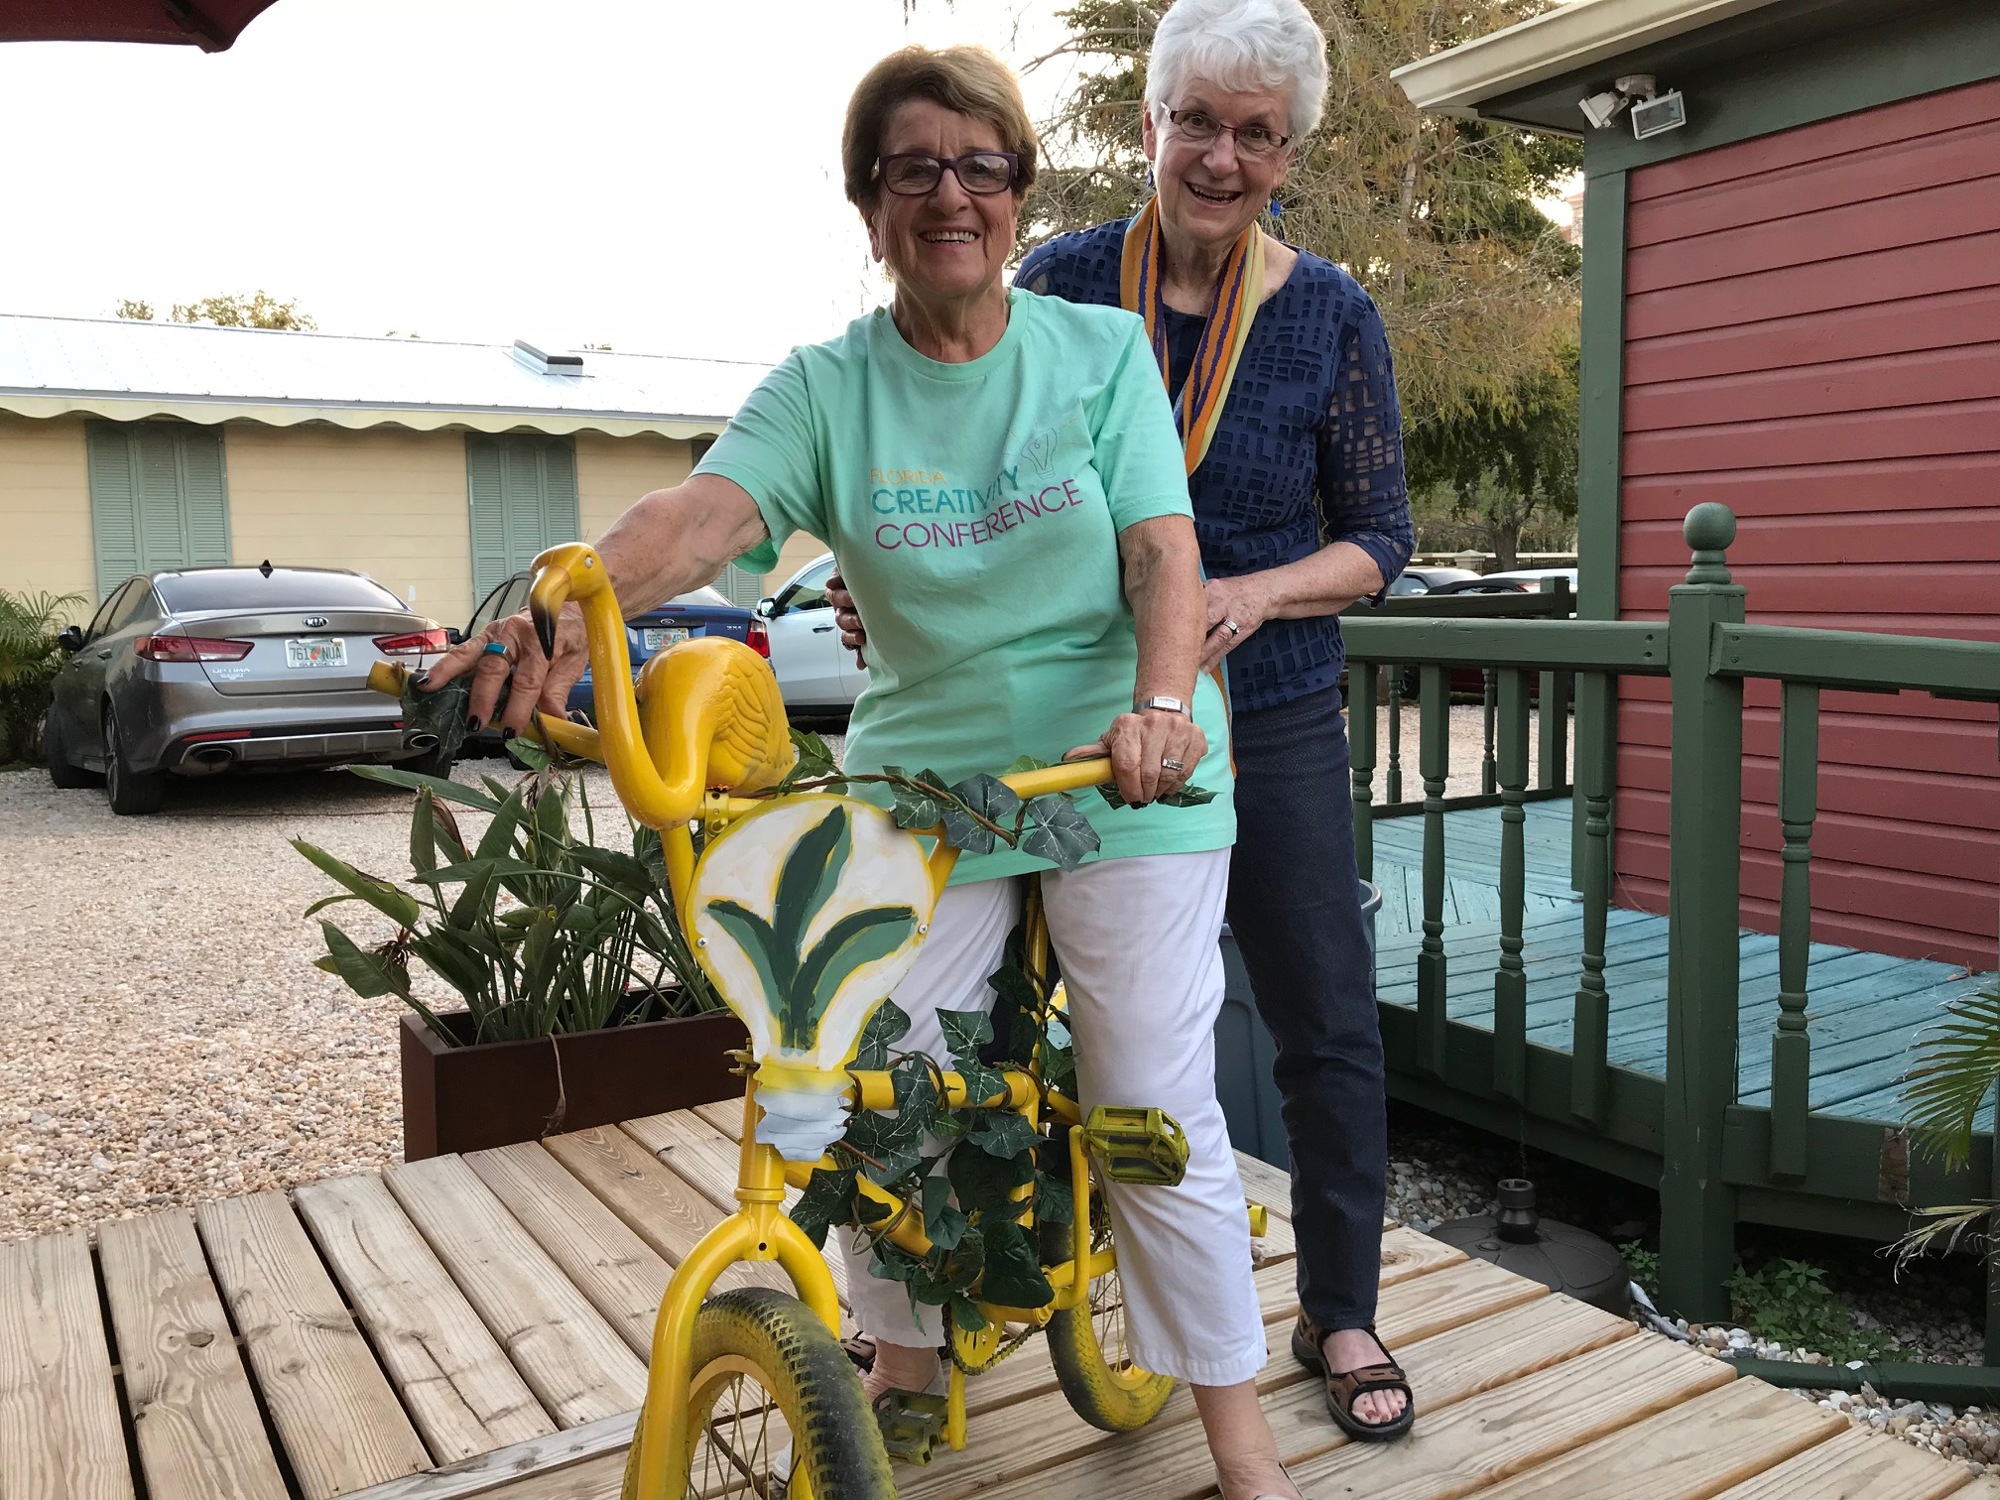 Florida Creativity Conference Co-Chairwomen Hedria Lunken Saltzman Kitty Heusner show off the bike made by Sarasota creator William Pearson in honor of the 2018 conference theme: Grow Your Creativity. Courtesy image